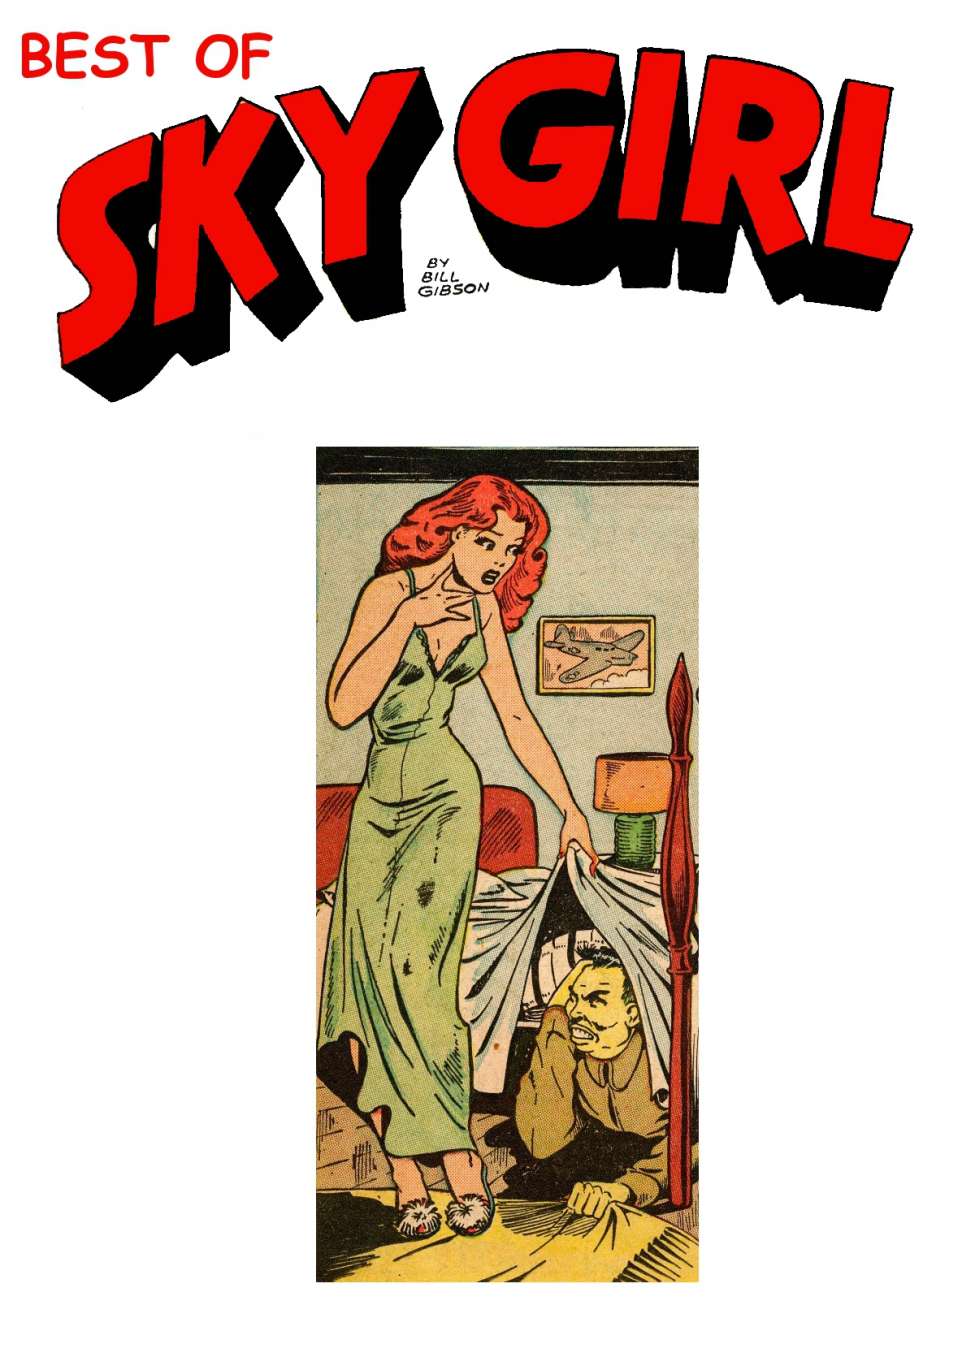 Book Cover For Sky Girl Collection, The Best of (Fiction House)